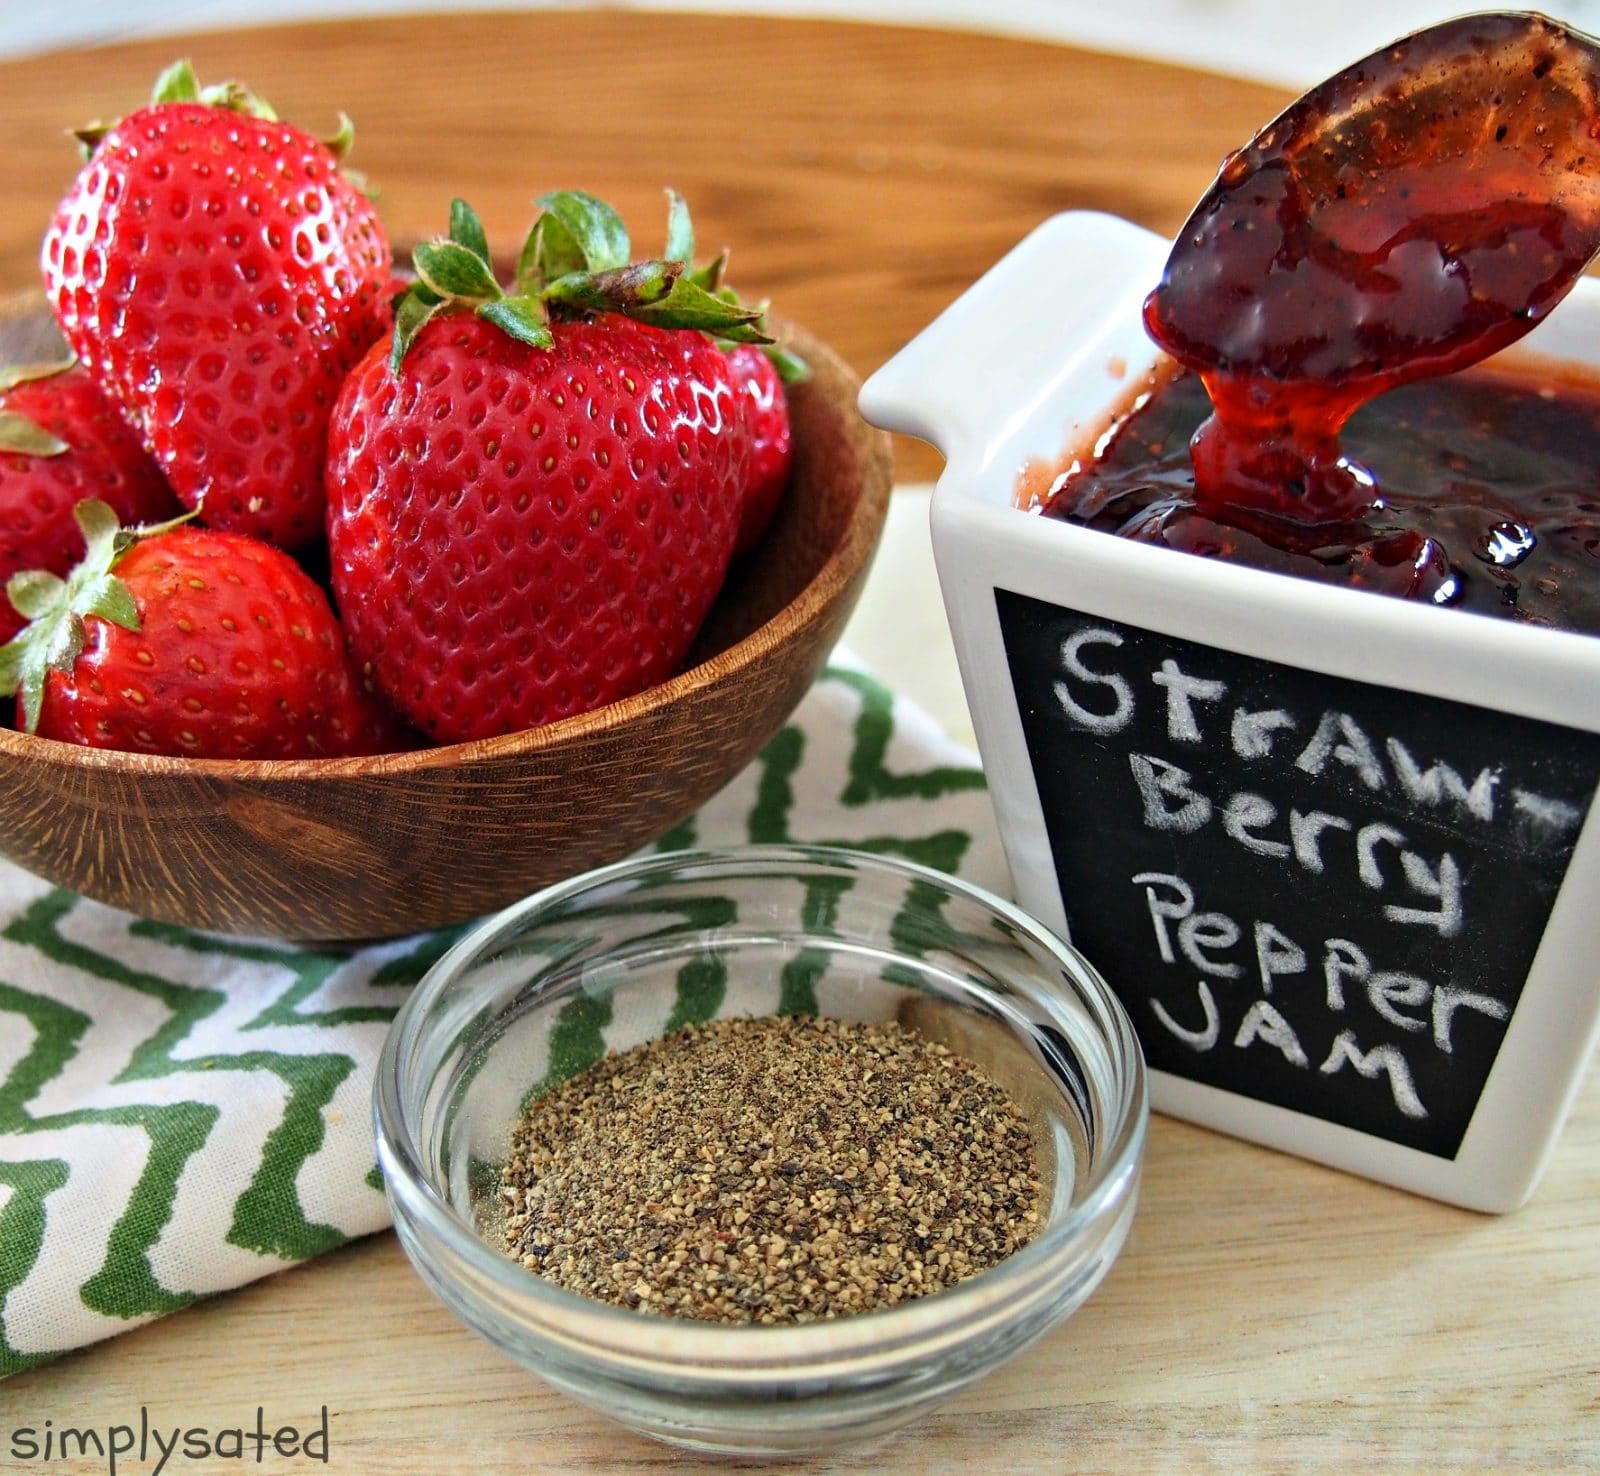 Strawberry, Black Pepper Jam - the perfect strawberry jam infused with just enough black pepper to spice things up. www.simplysated.com